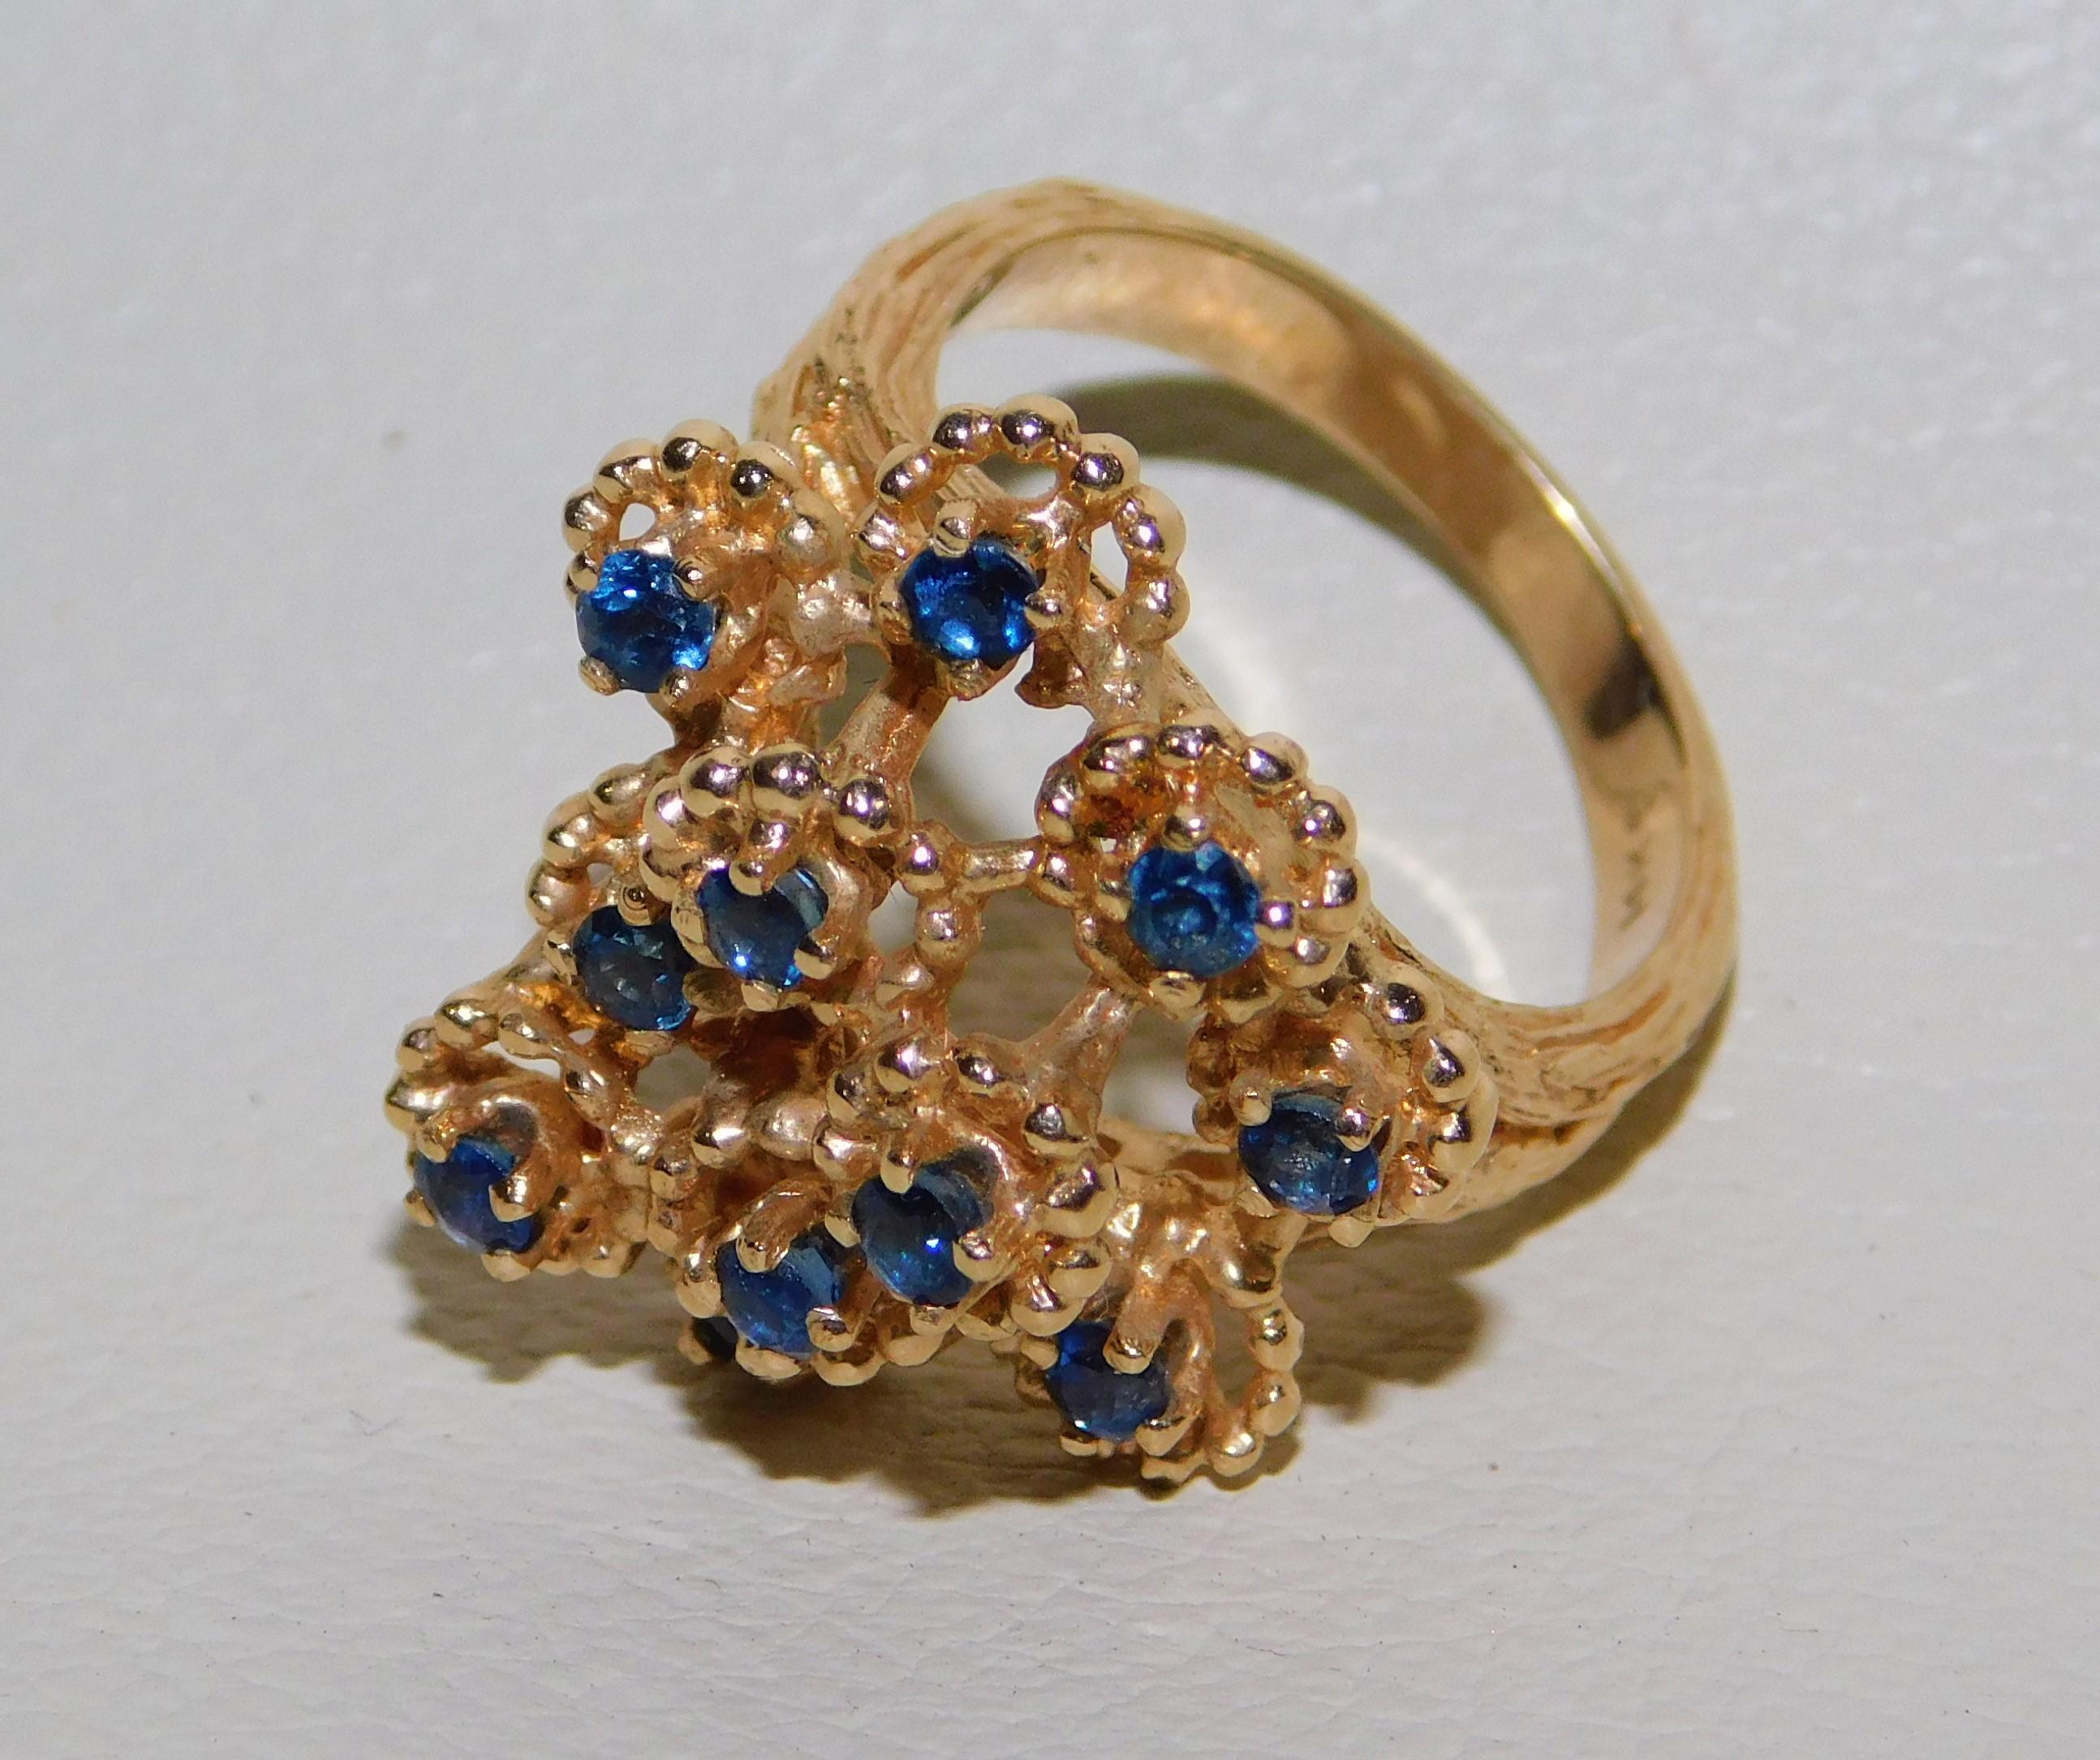 14-Karat Gold Ladies Floral Design Cocktail Ring with Blue Sapphire Gemstones In Good Condition For Sale In Hamilton, Ontario